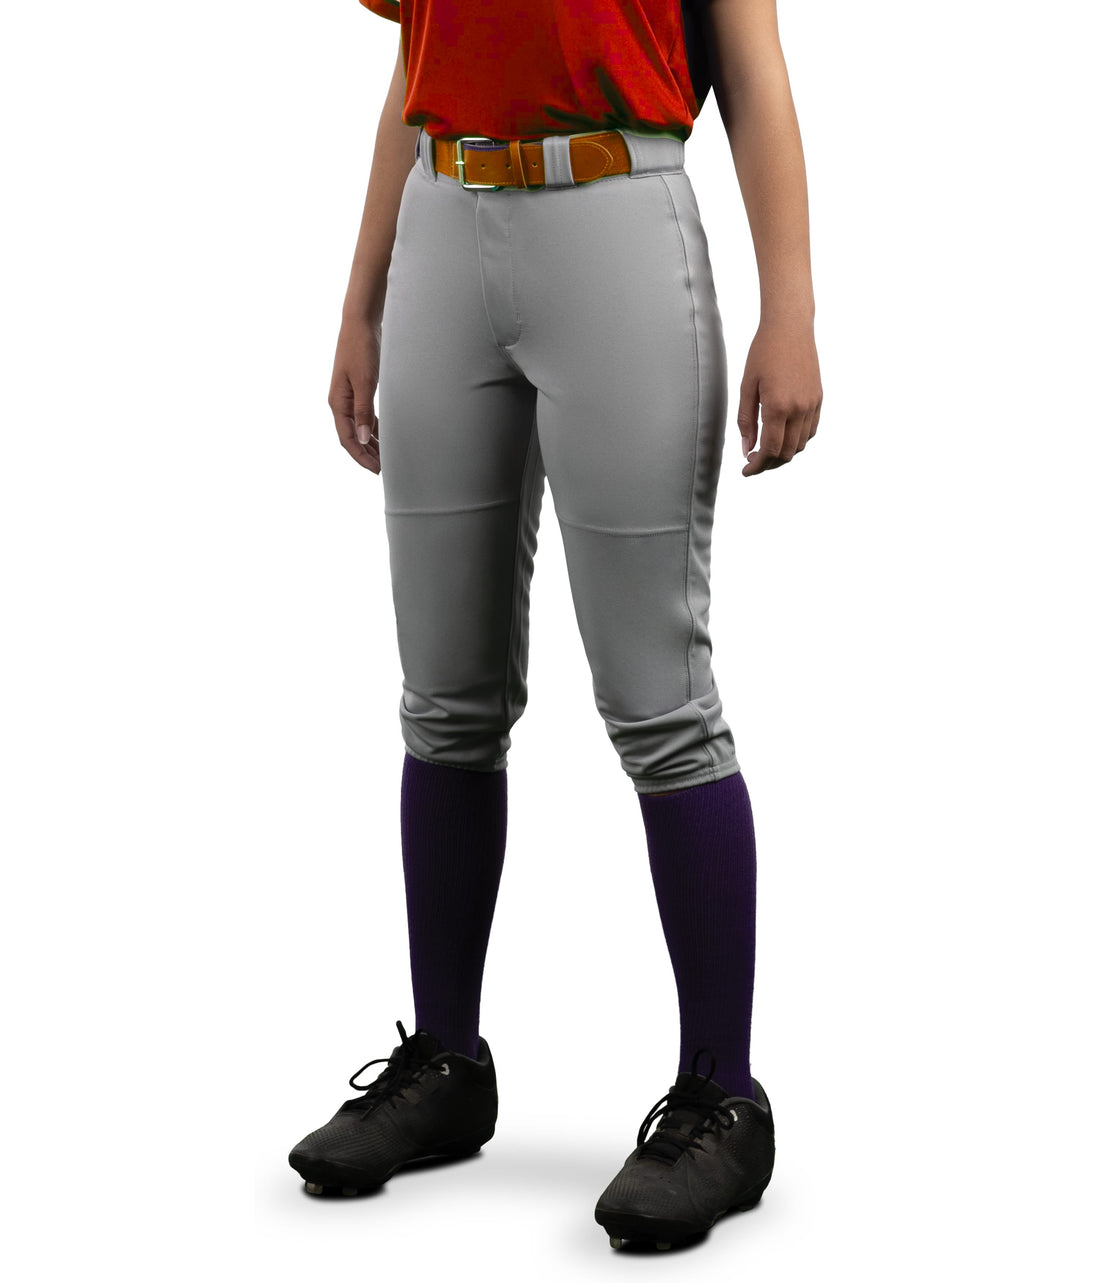 MSLL Game Pants